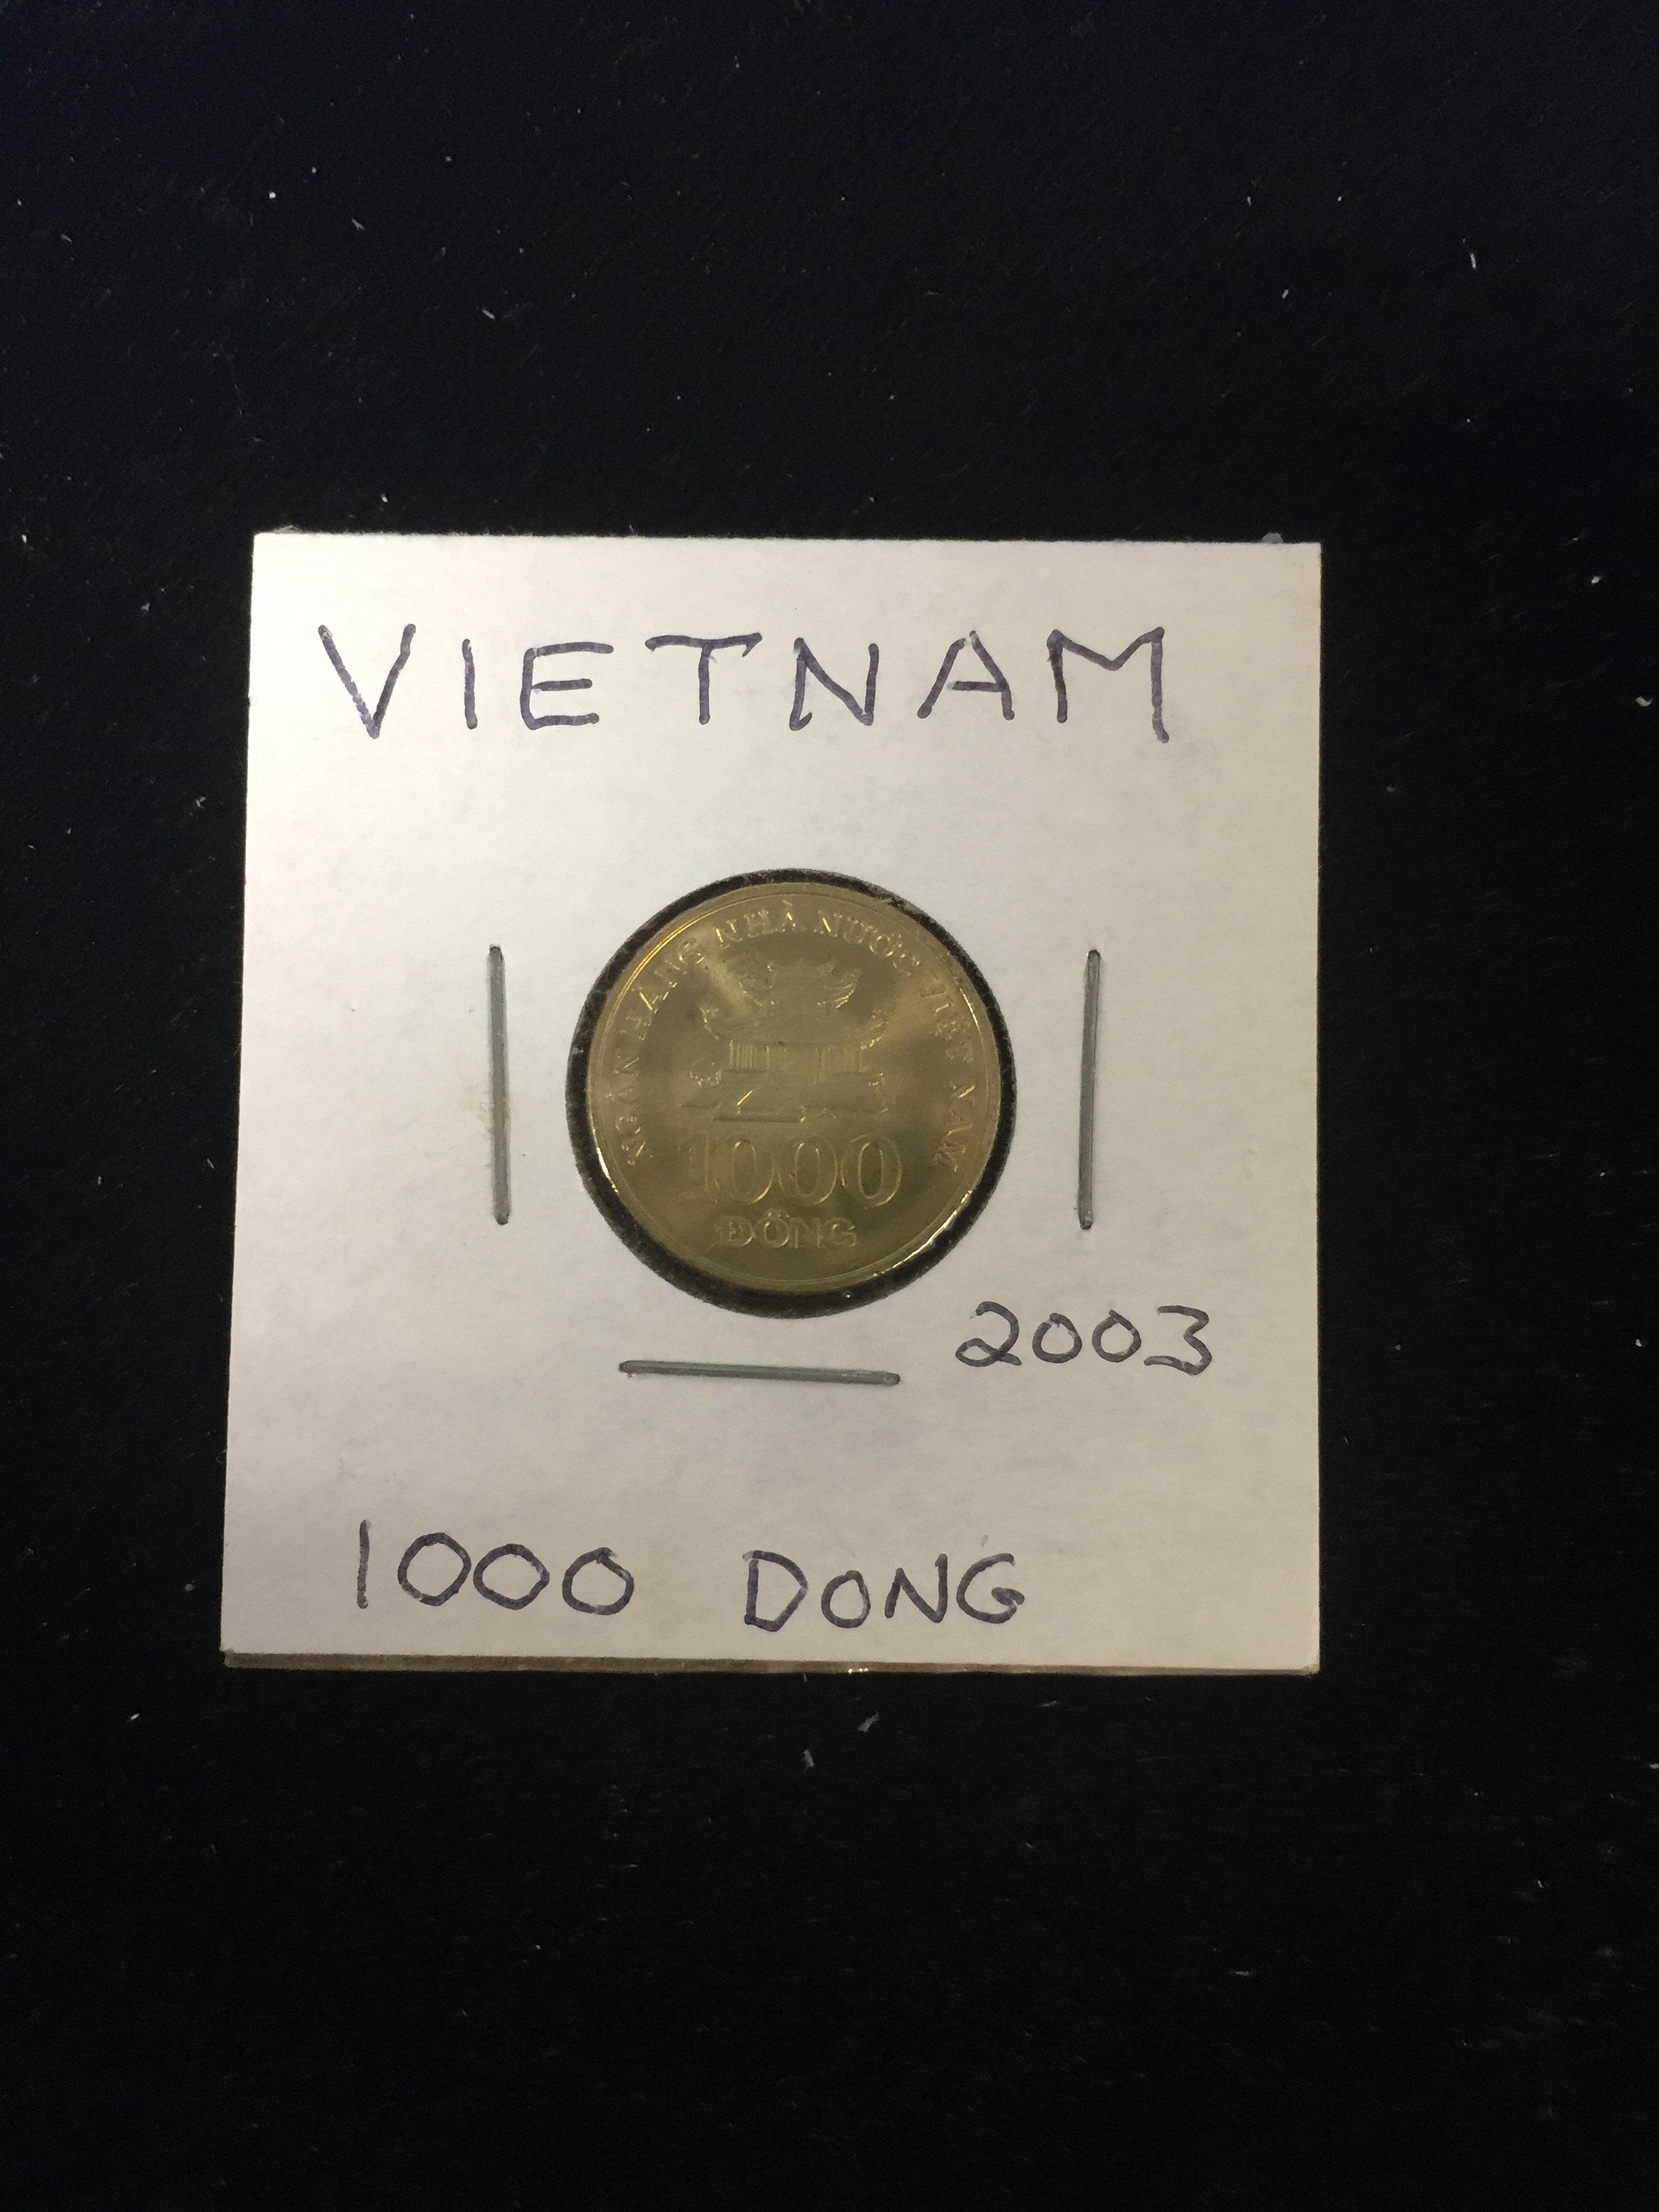 2003 Vietnam - 1,000 Dong - Foreign Coin in Holder